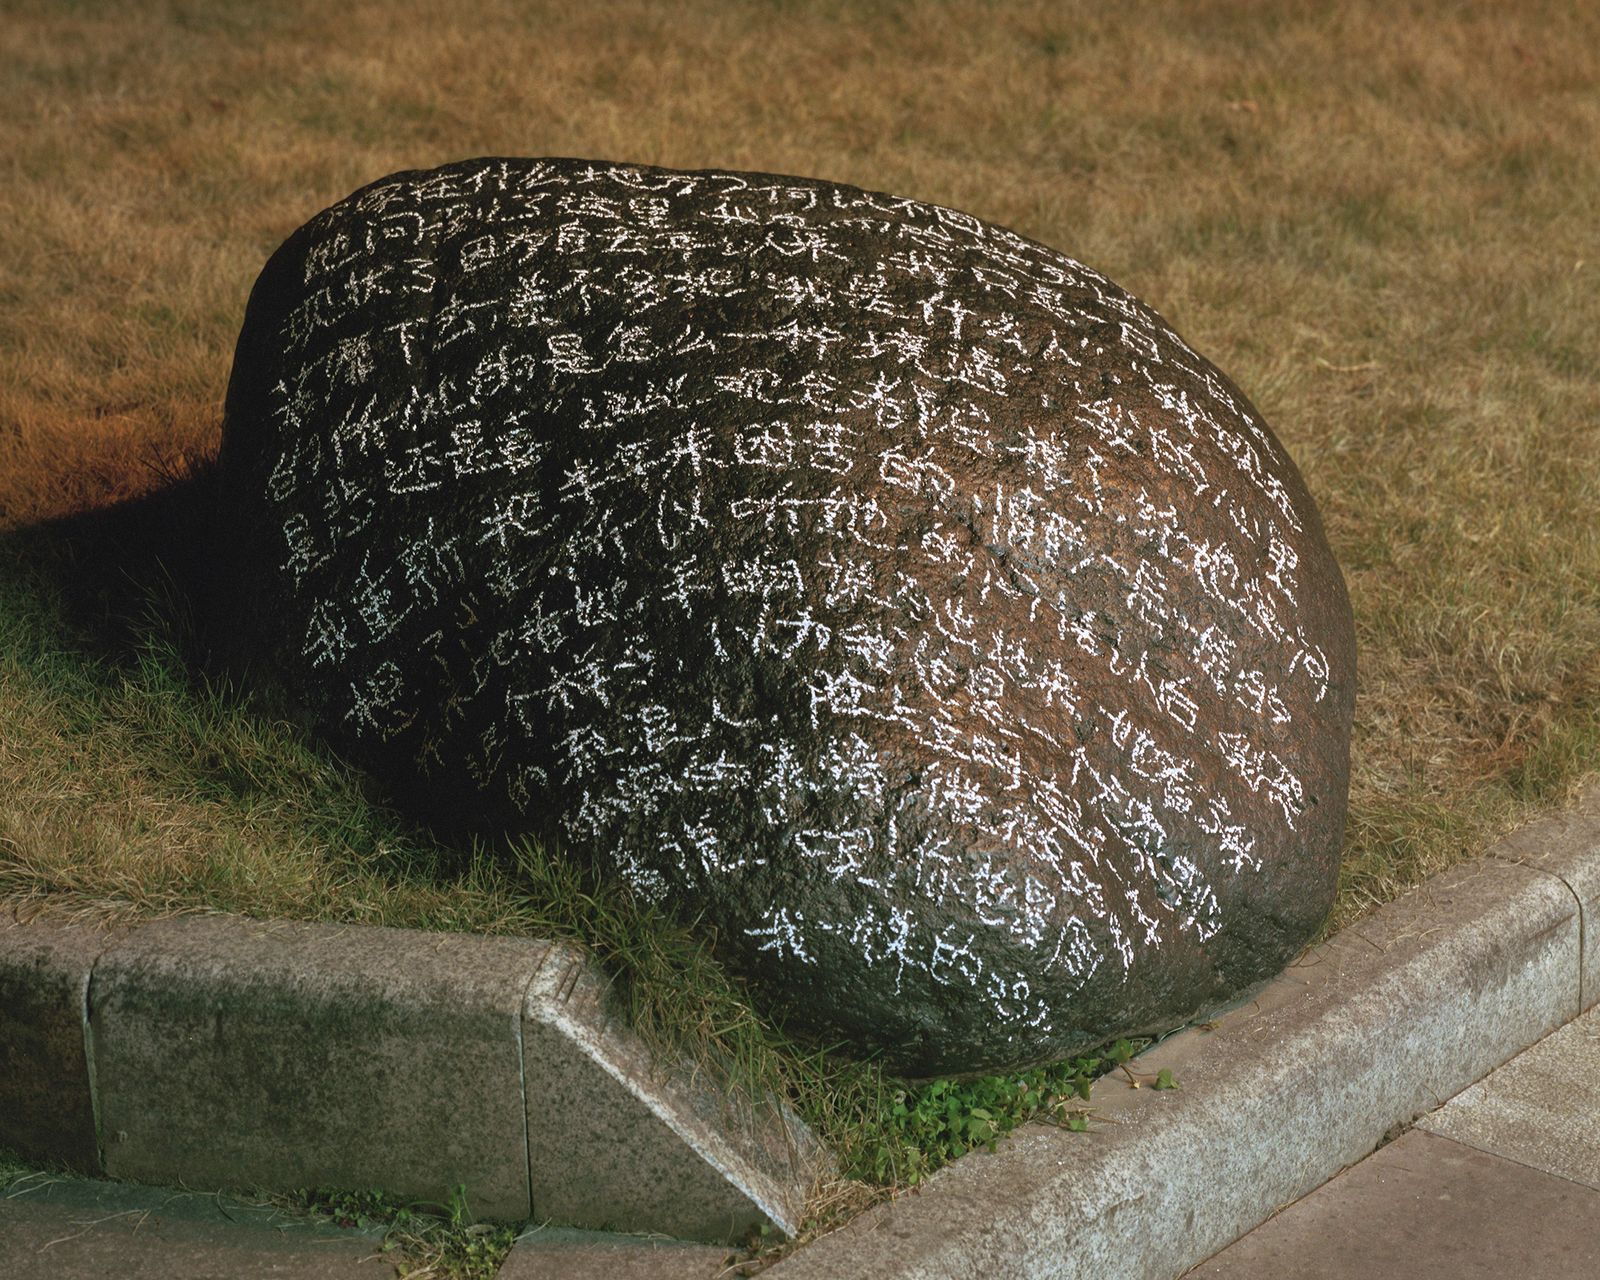 © Bowei Yang - Yu’s poem written on the stone by the Fuchun river, drunk in a spring night, c-type print, 2018.